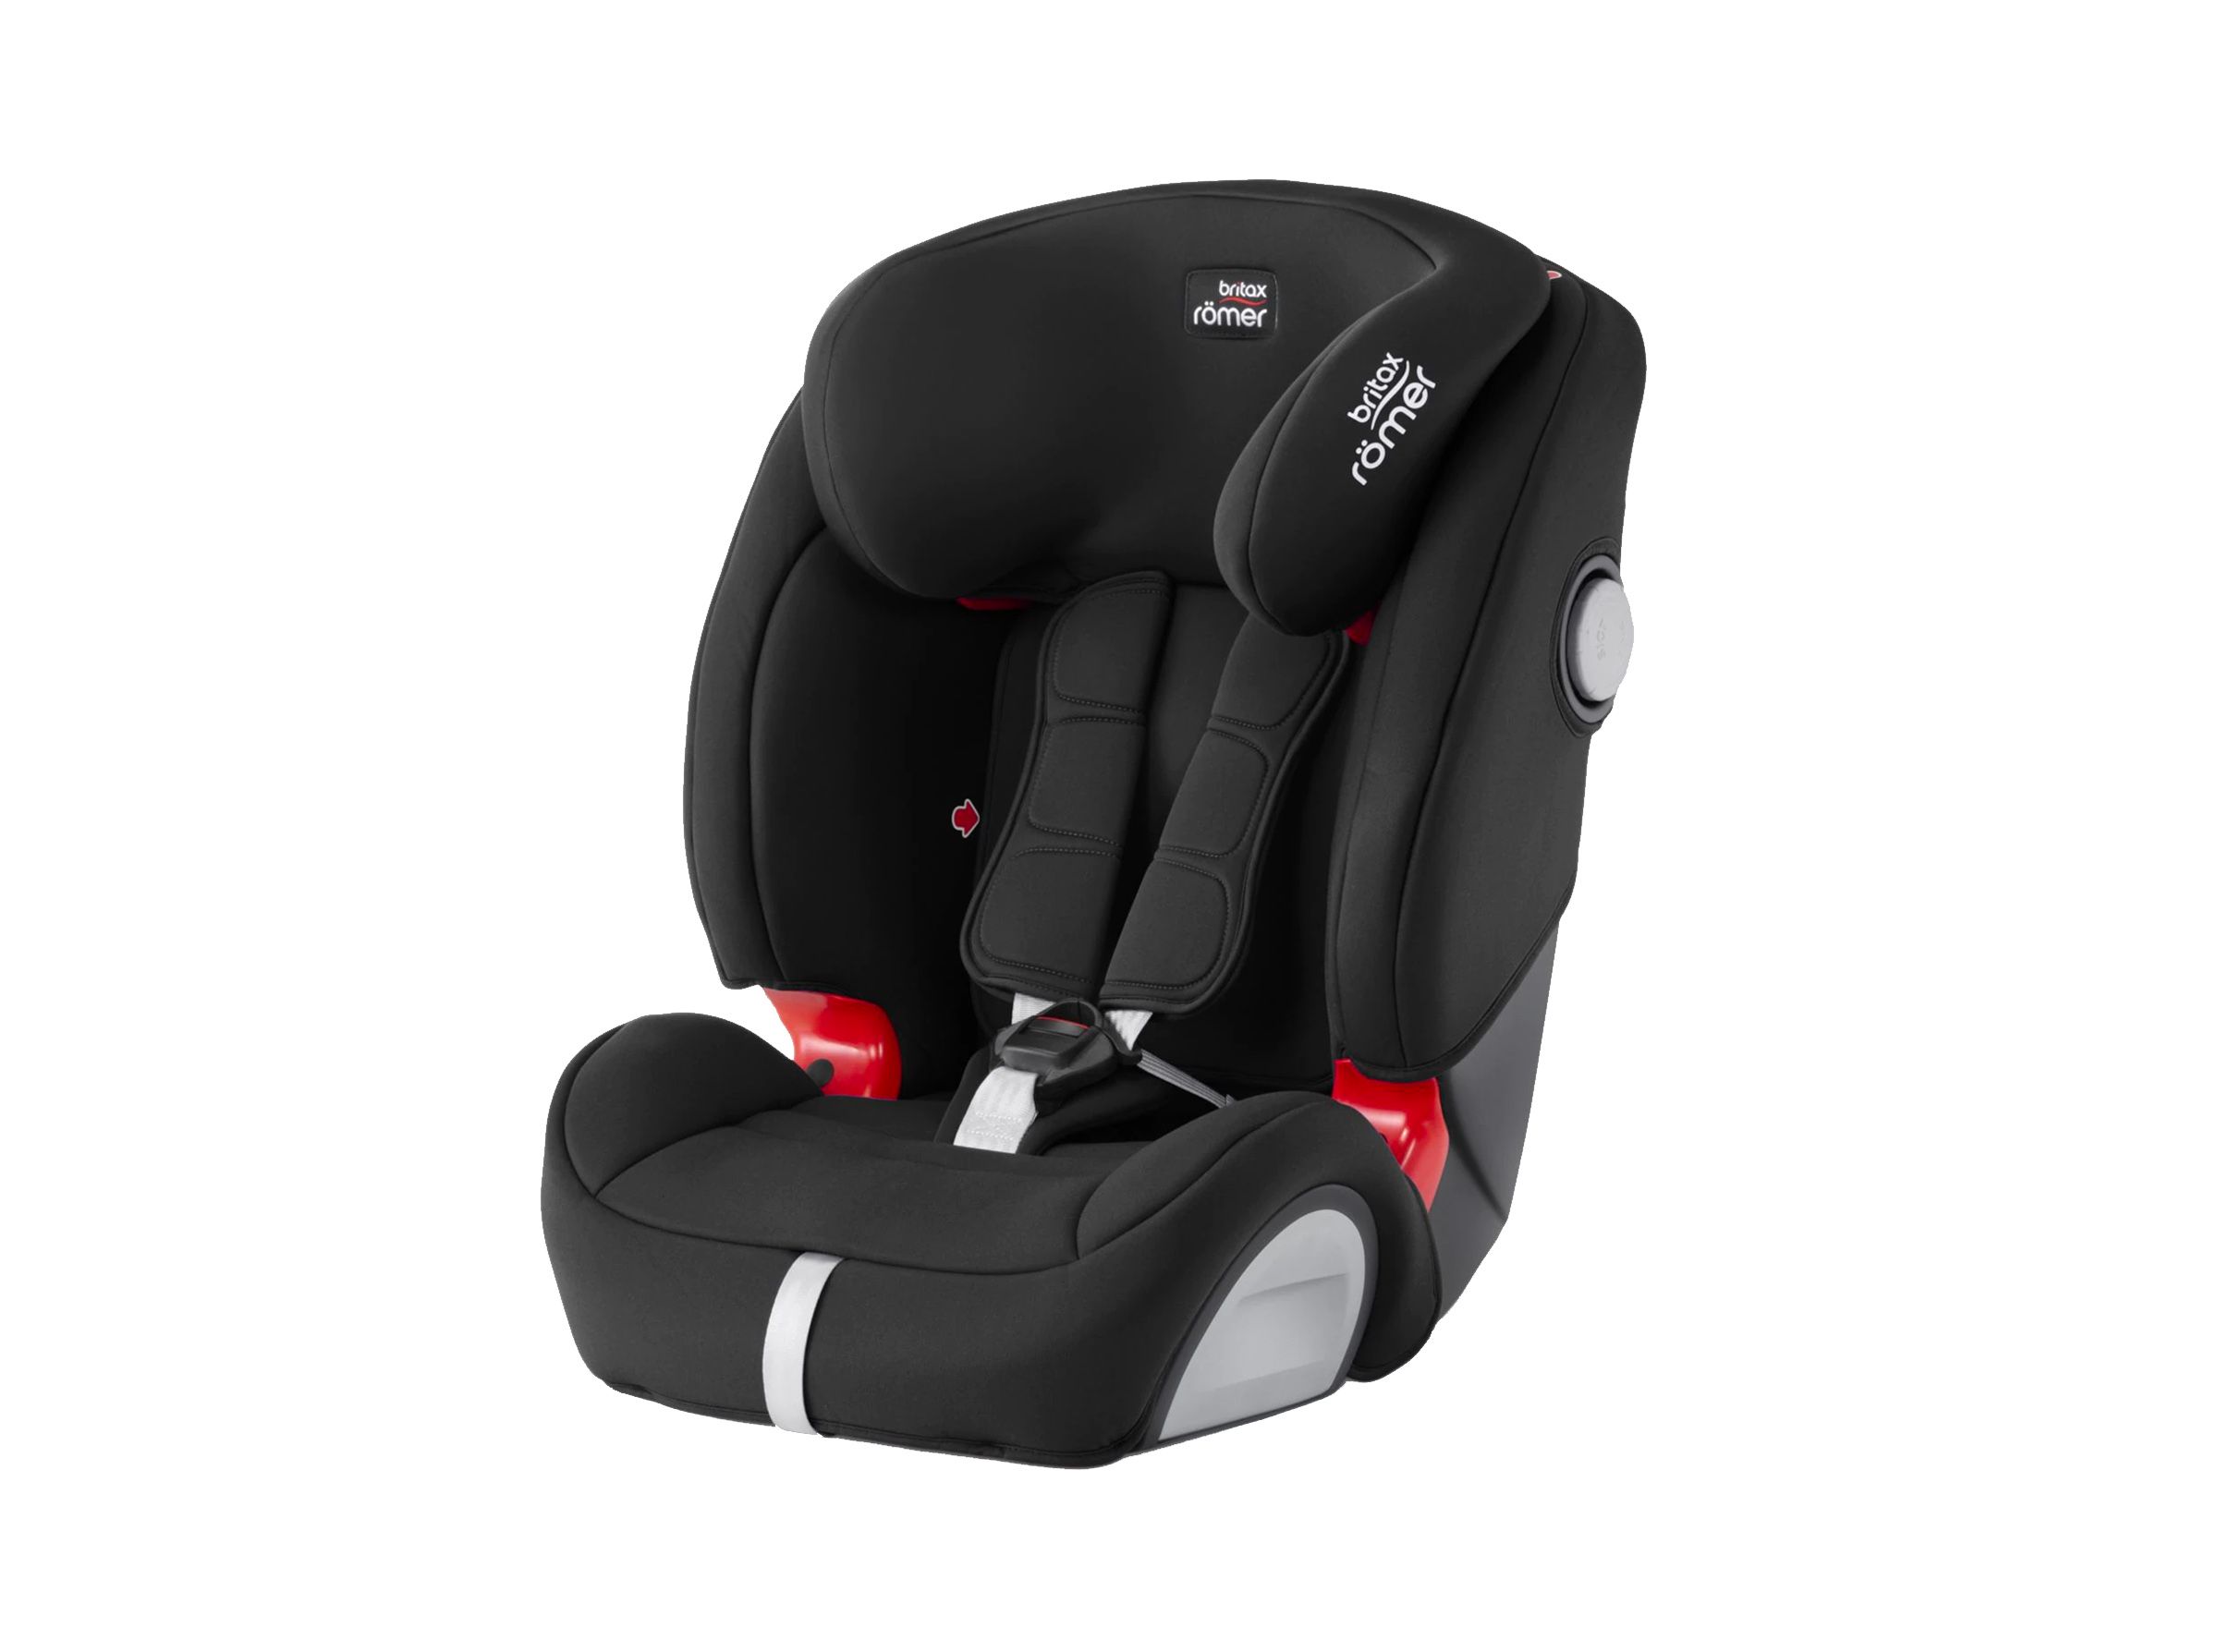 Car Seat For Your Child, What Do The Groups Mean For Child Car Seats